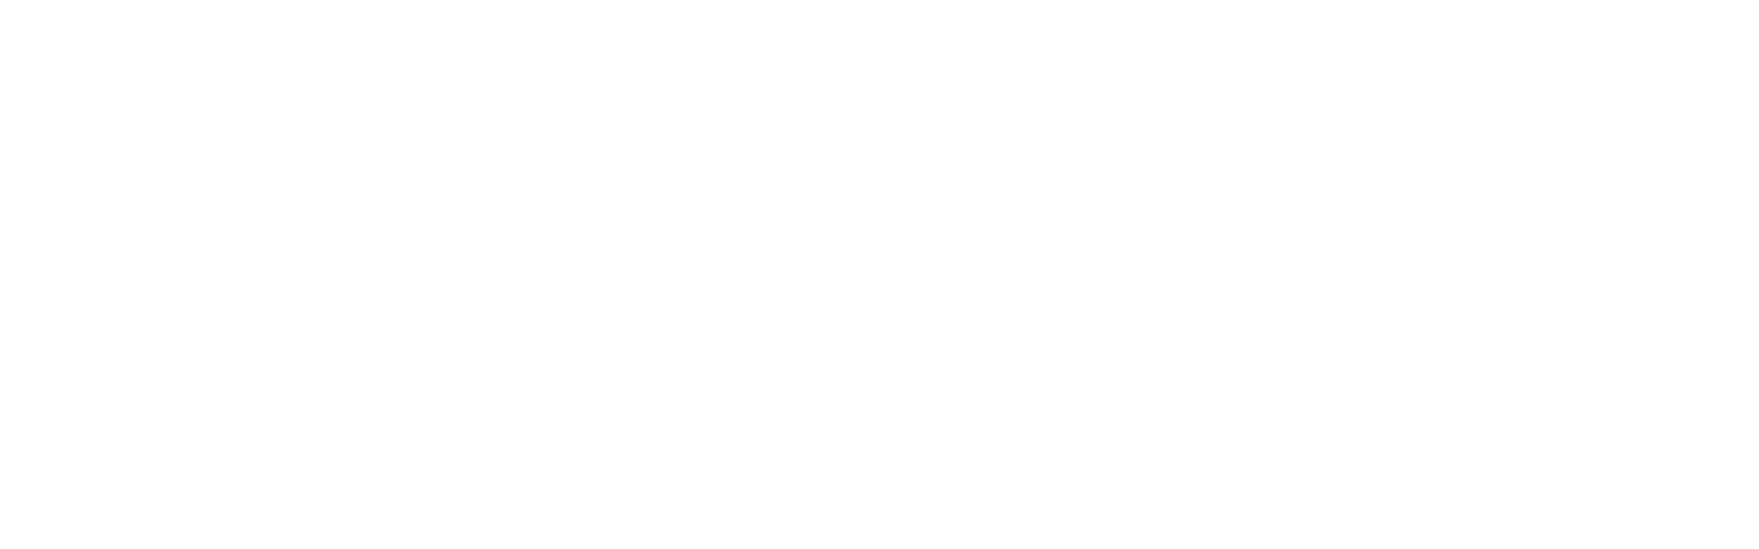 Best Practices Consulting